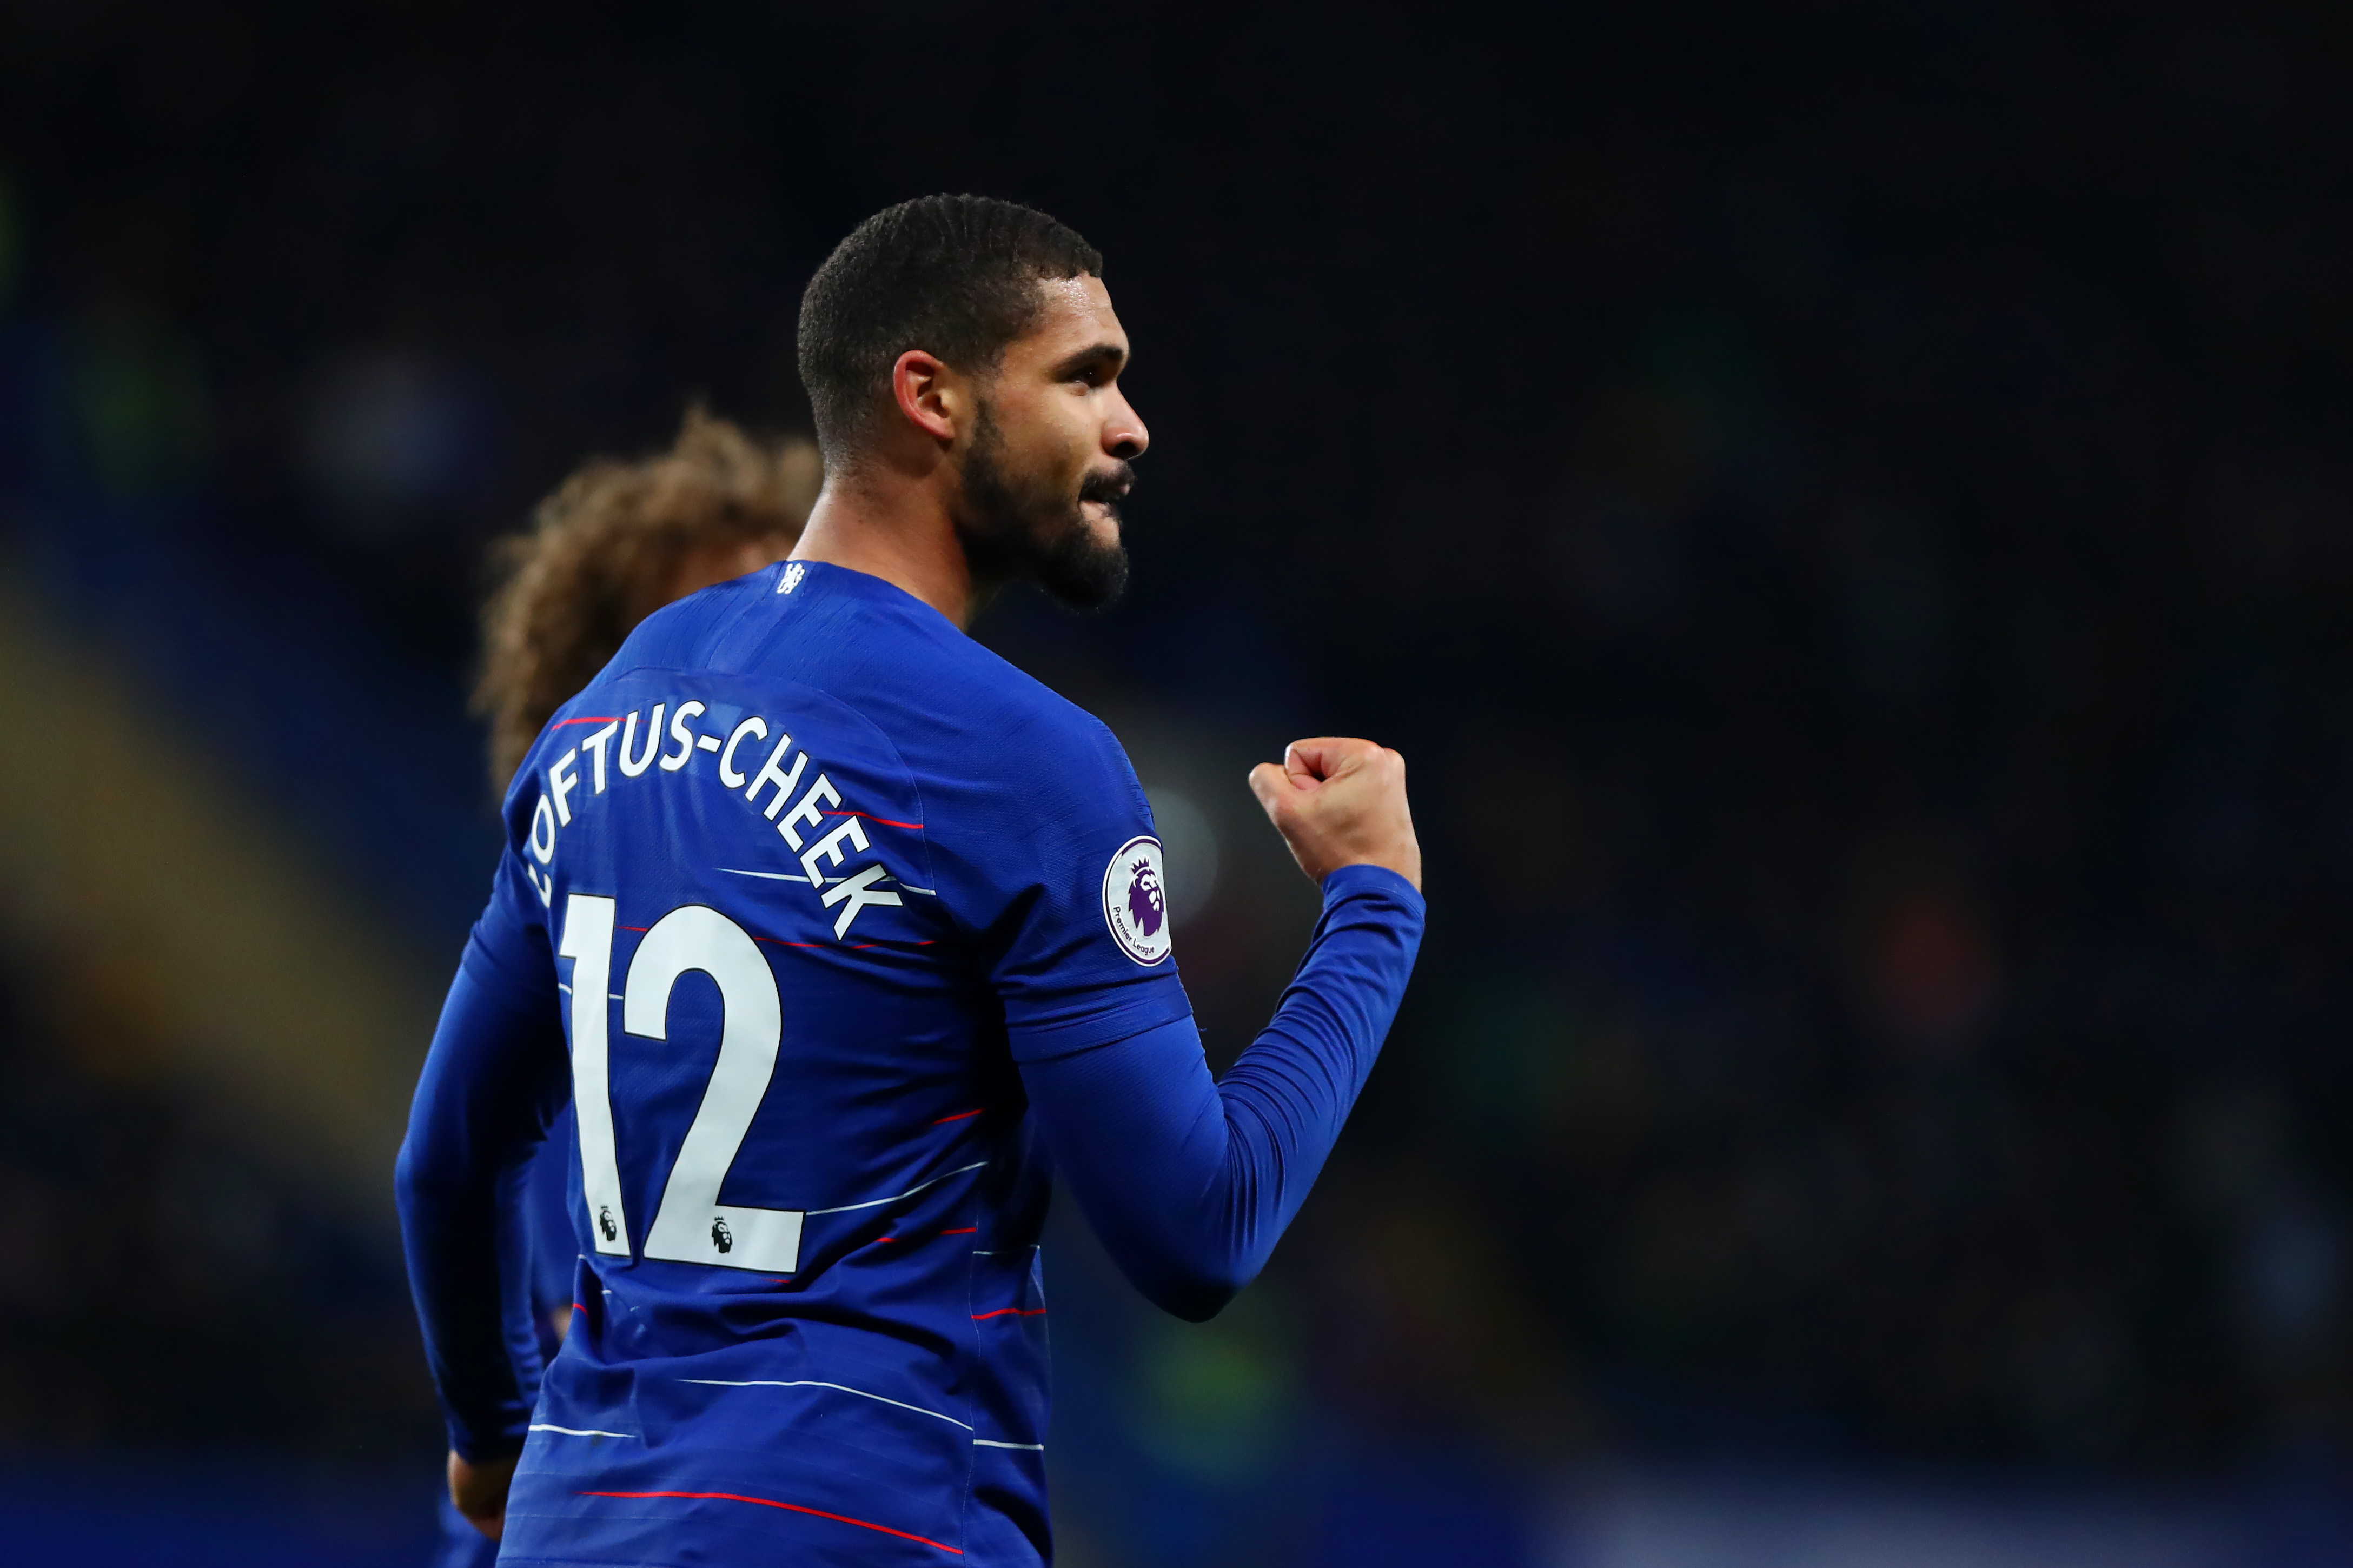 Loftus-Cheek wanted by Newcastle United (Photo by Dan Istitene/Getty Images)